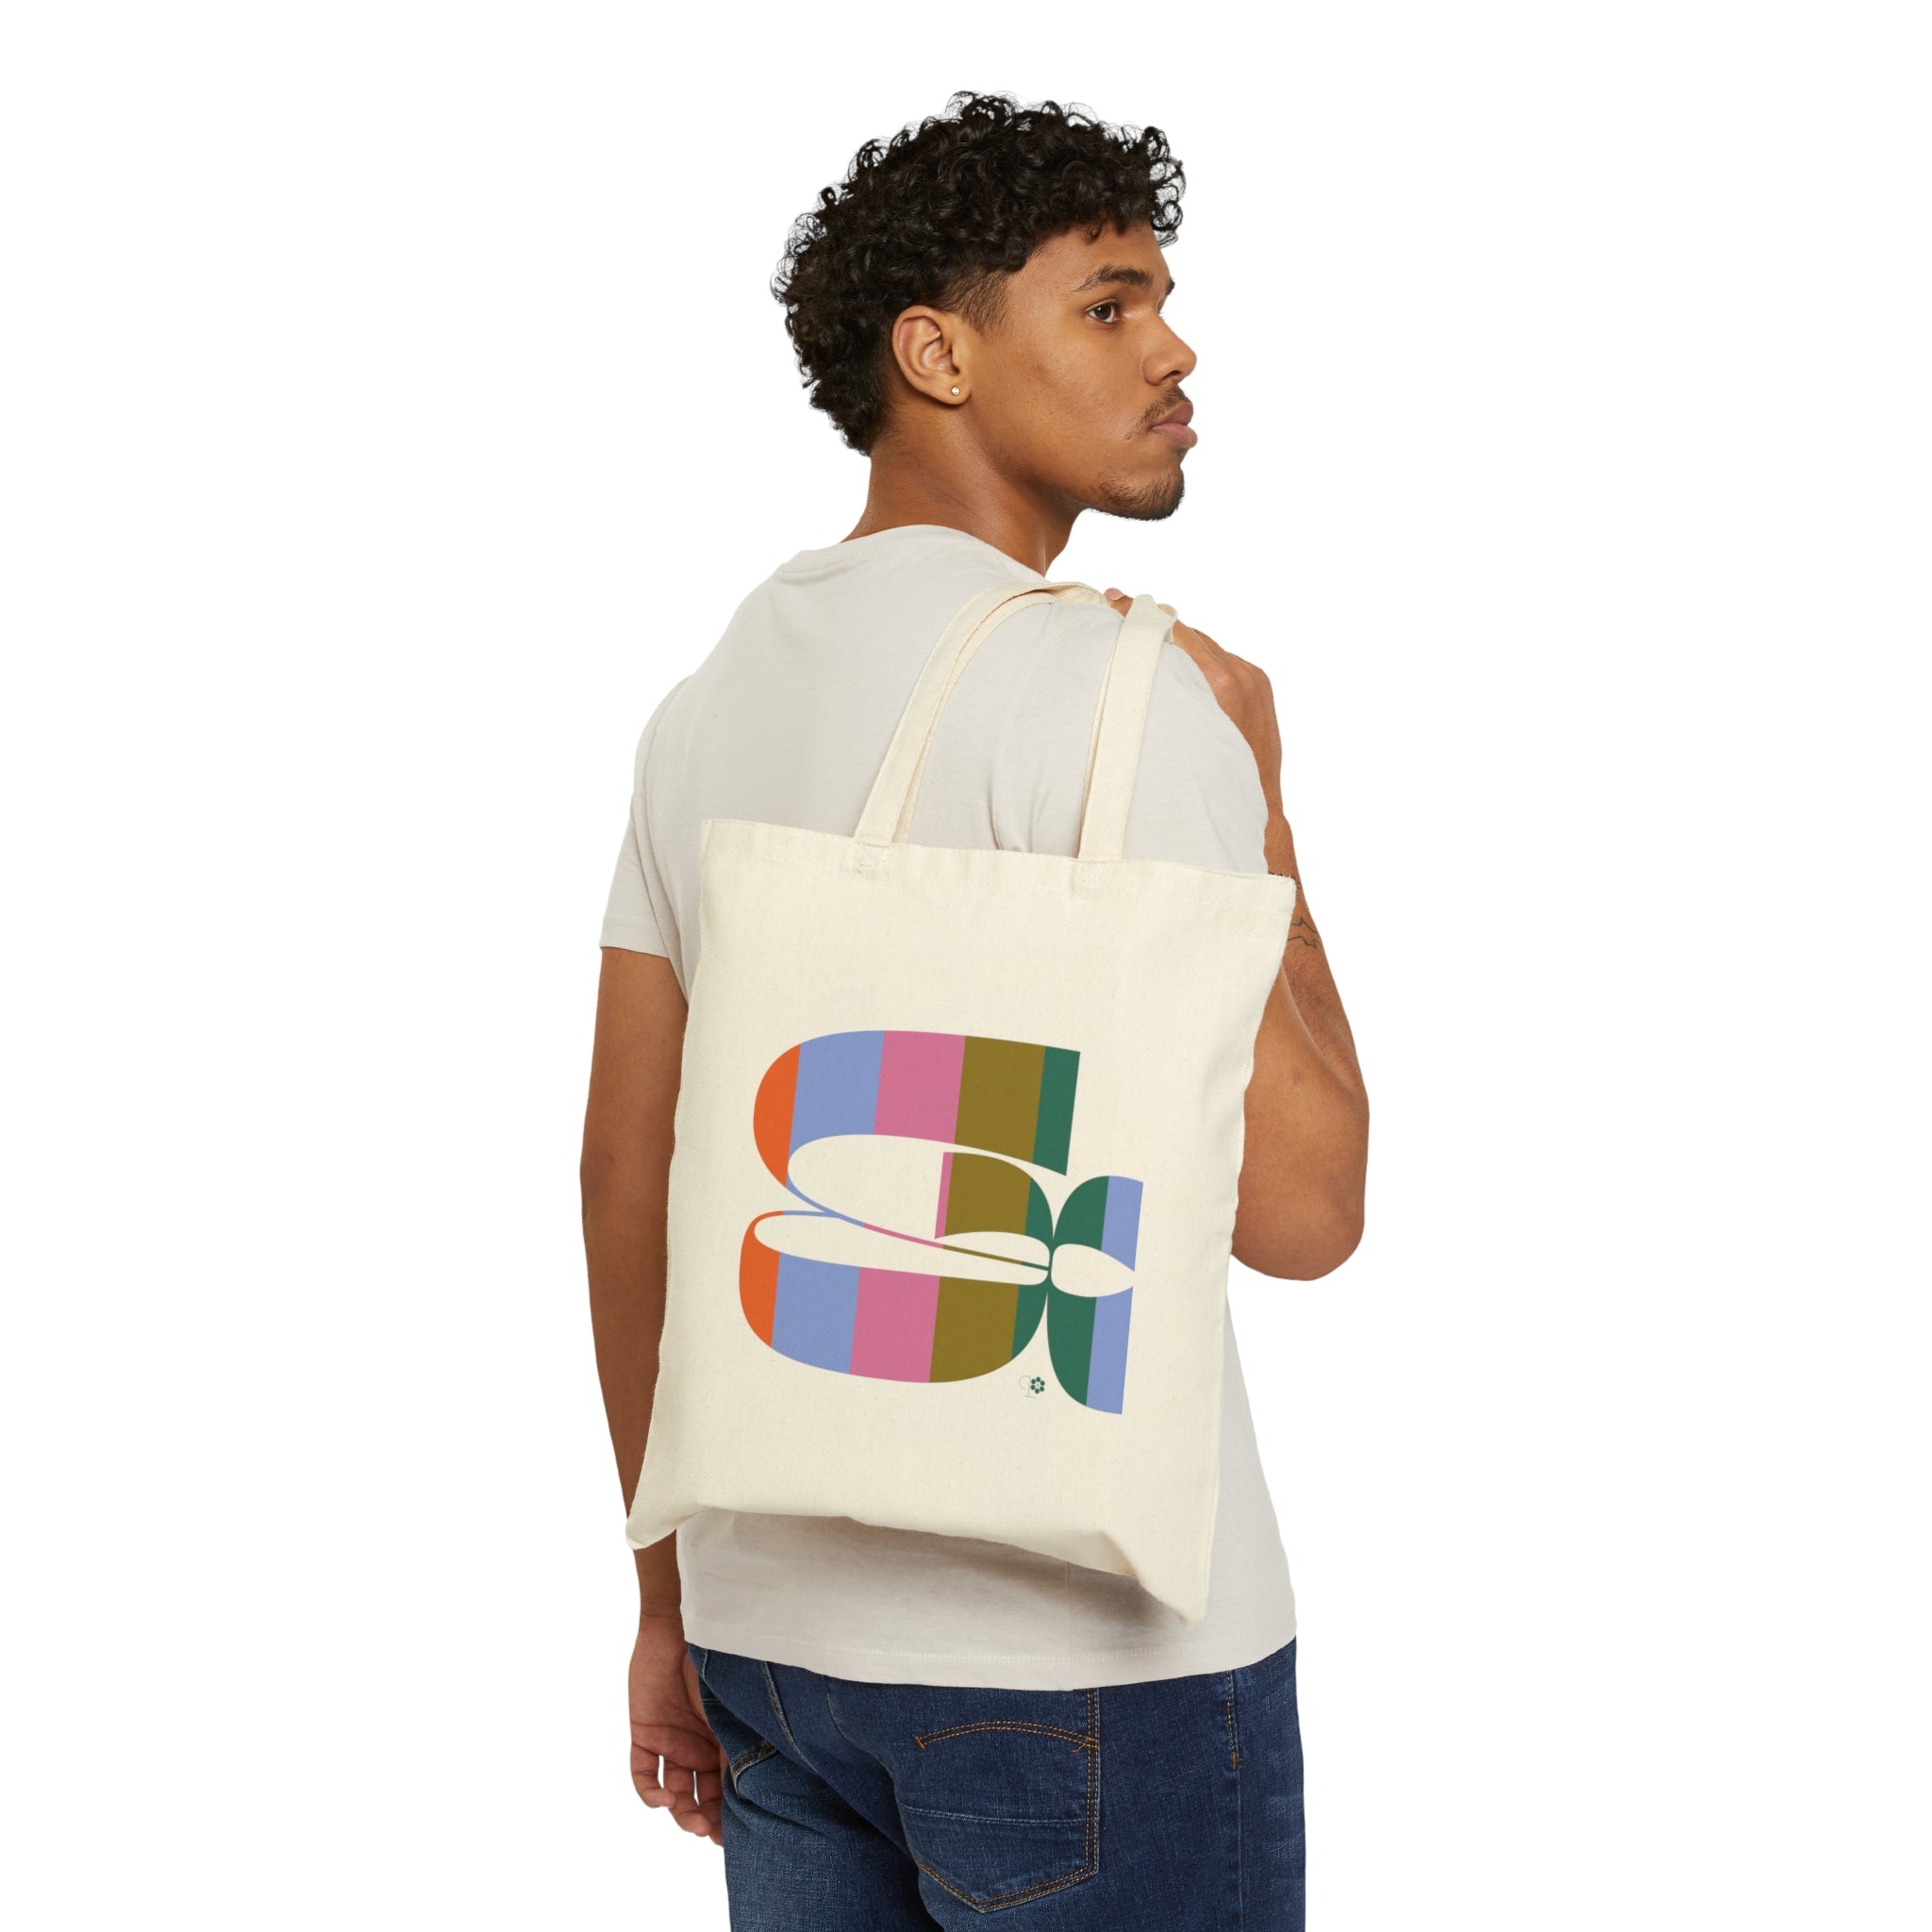 Smiles Full of Sh*t Canvas Tote